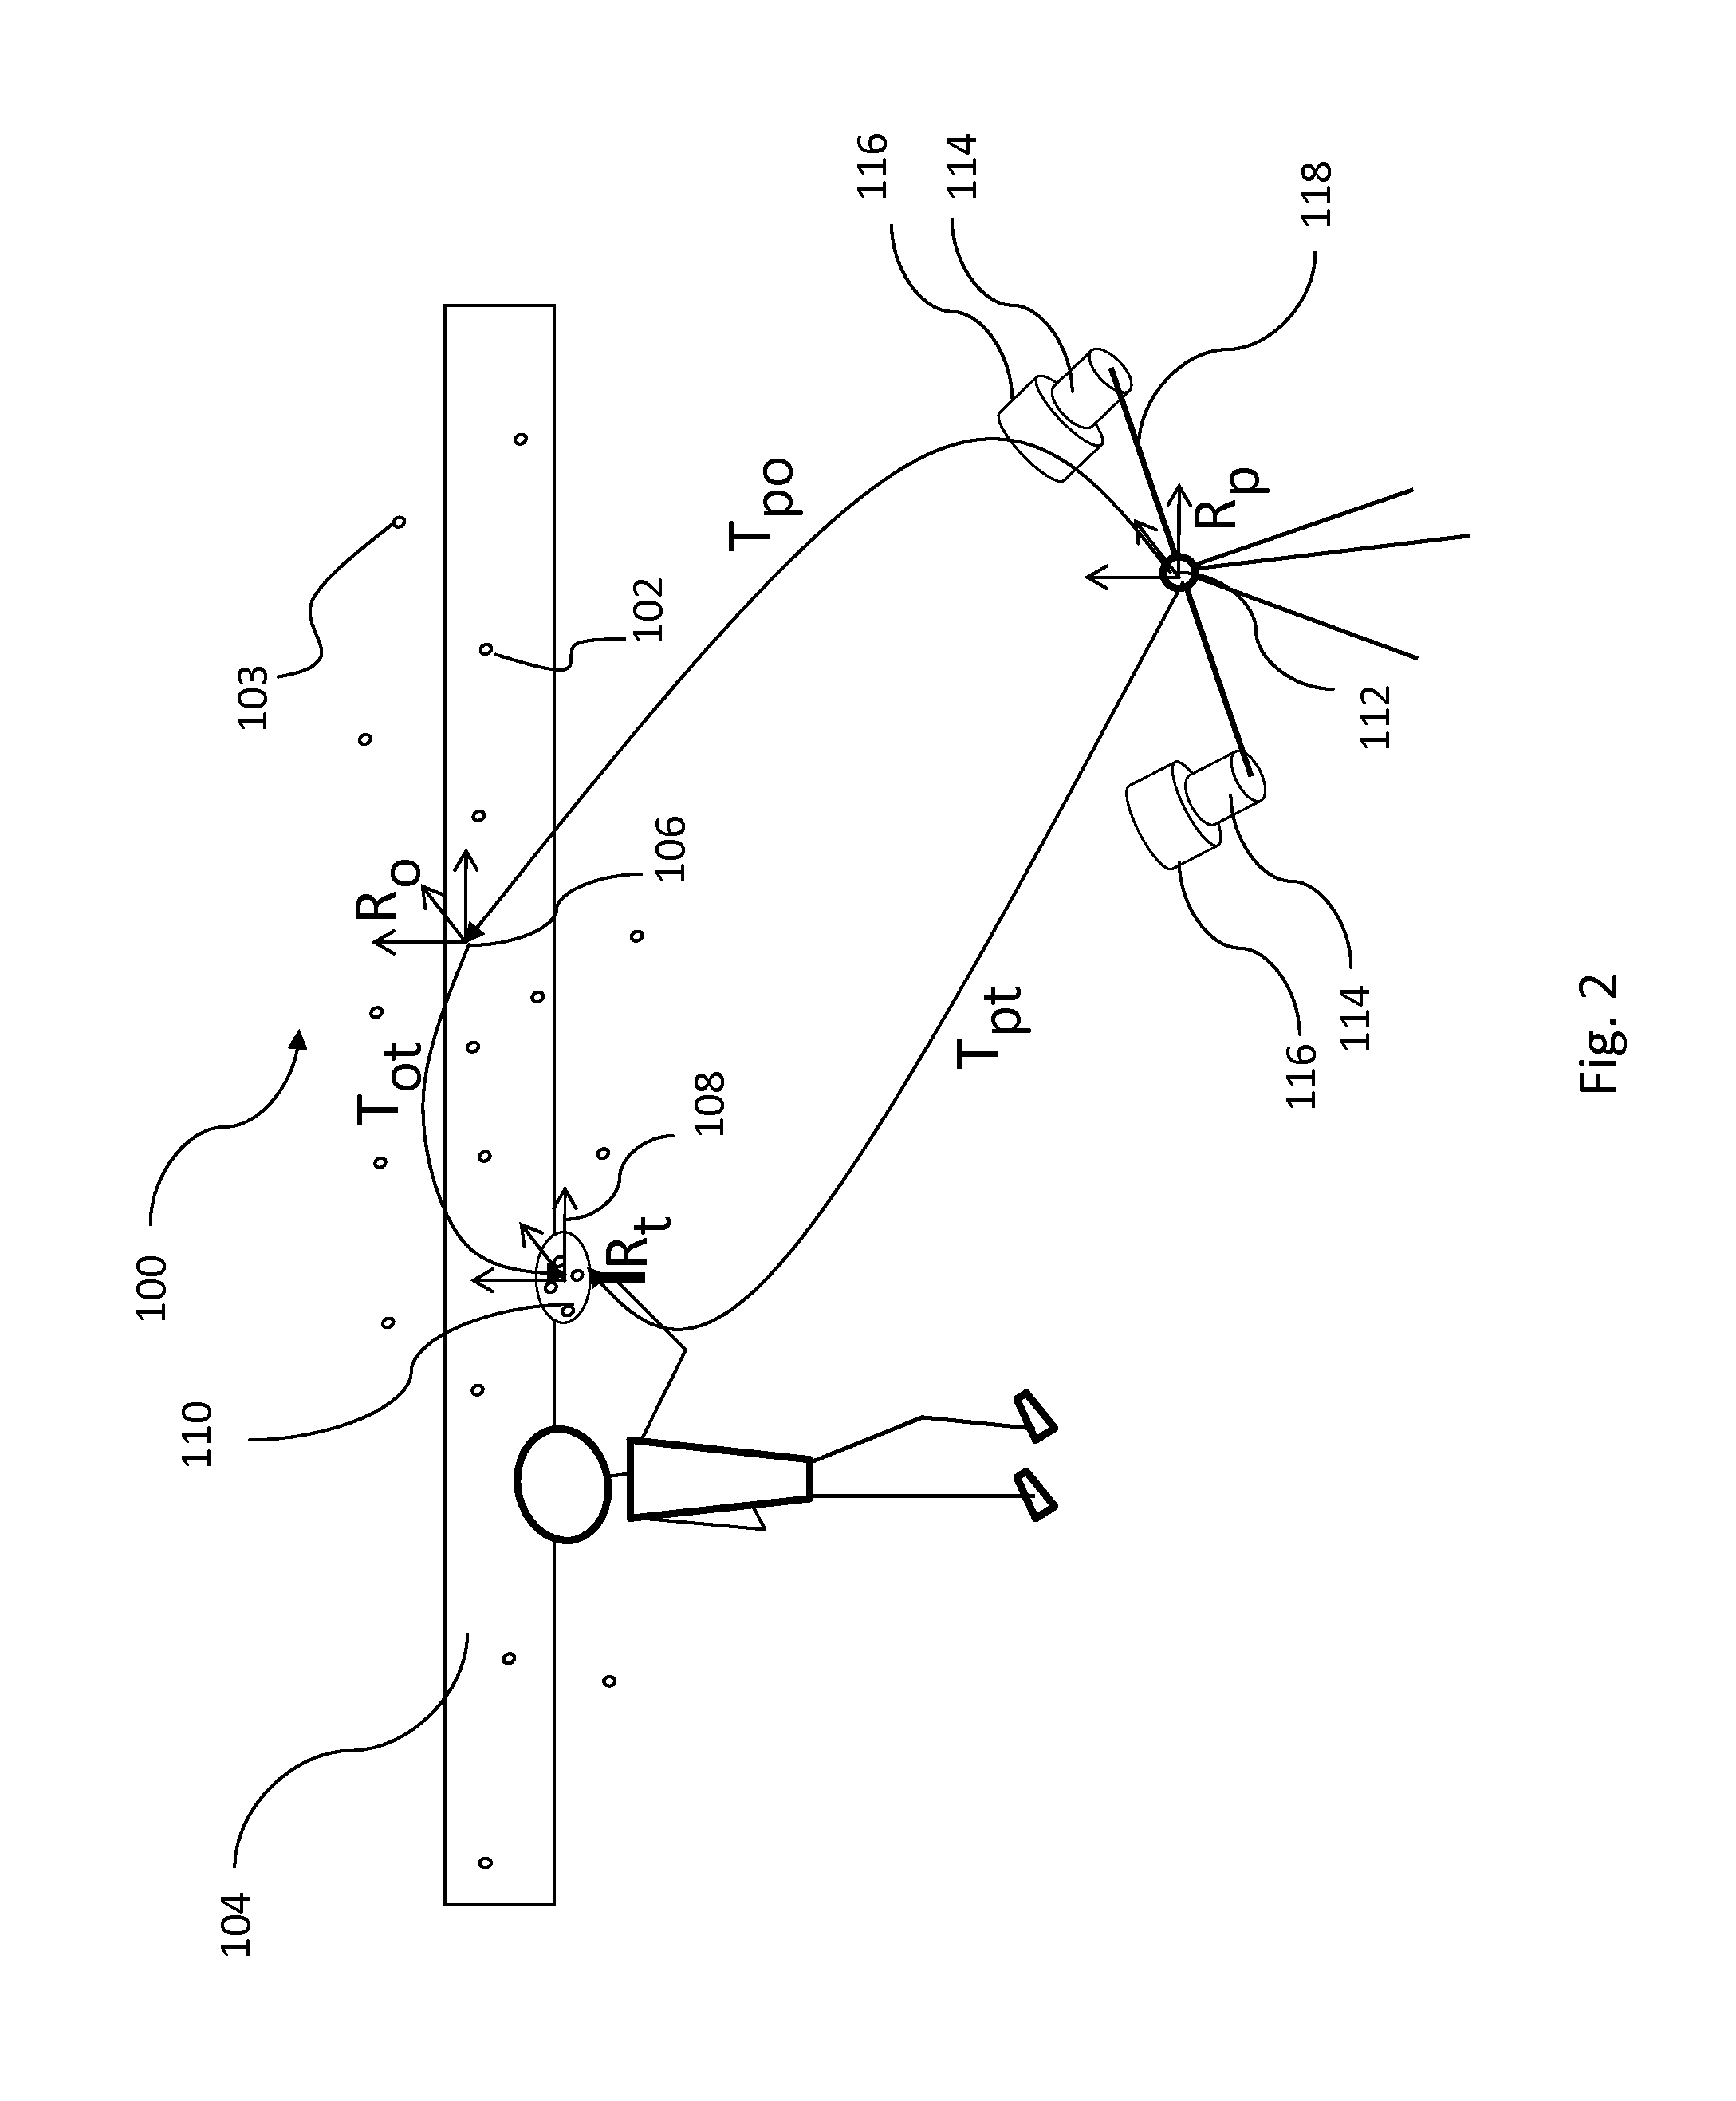 Object inspection with referenced volumetric analysis sensor